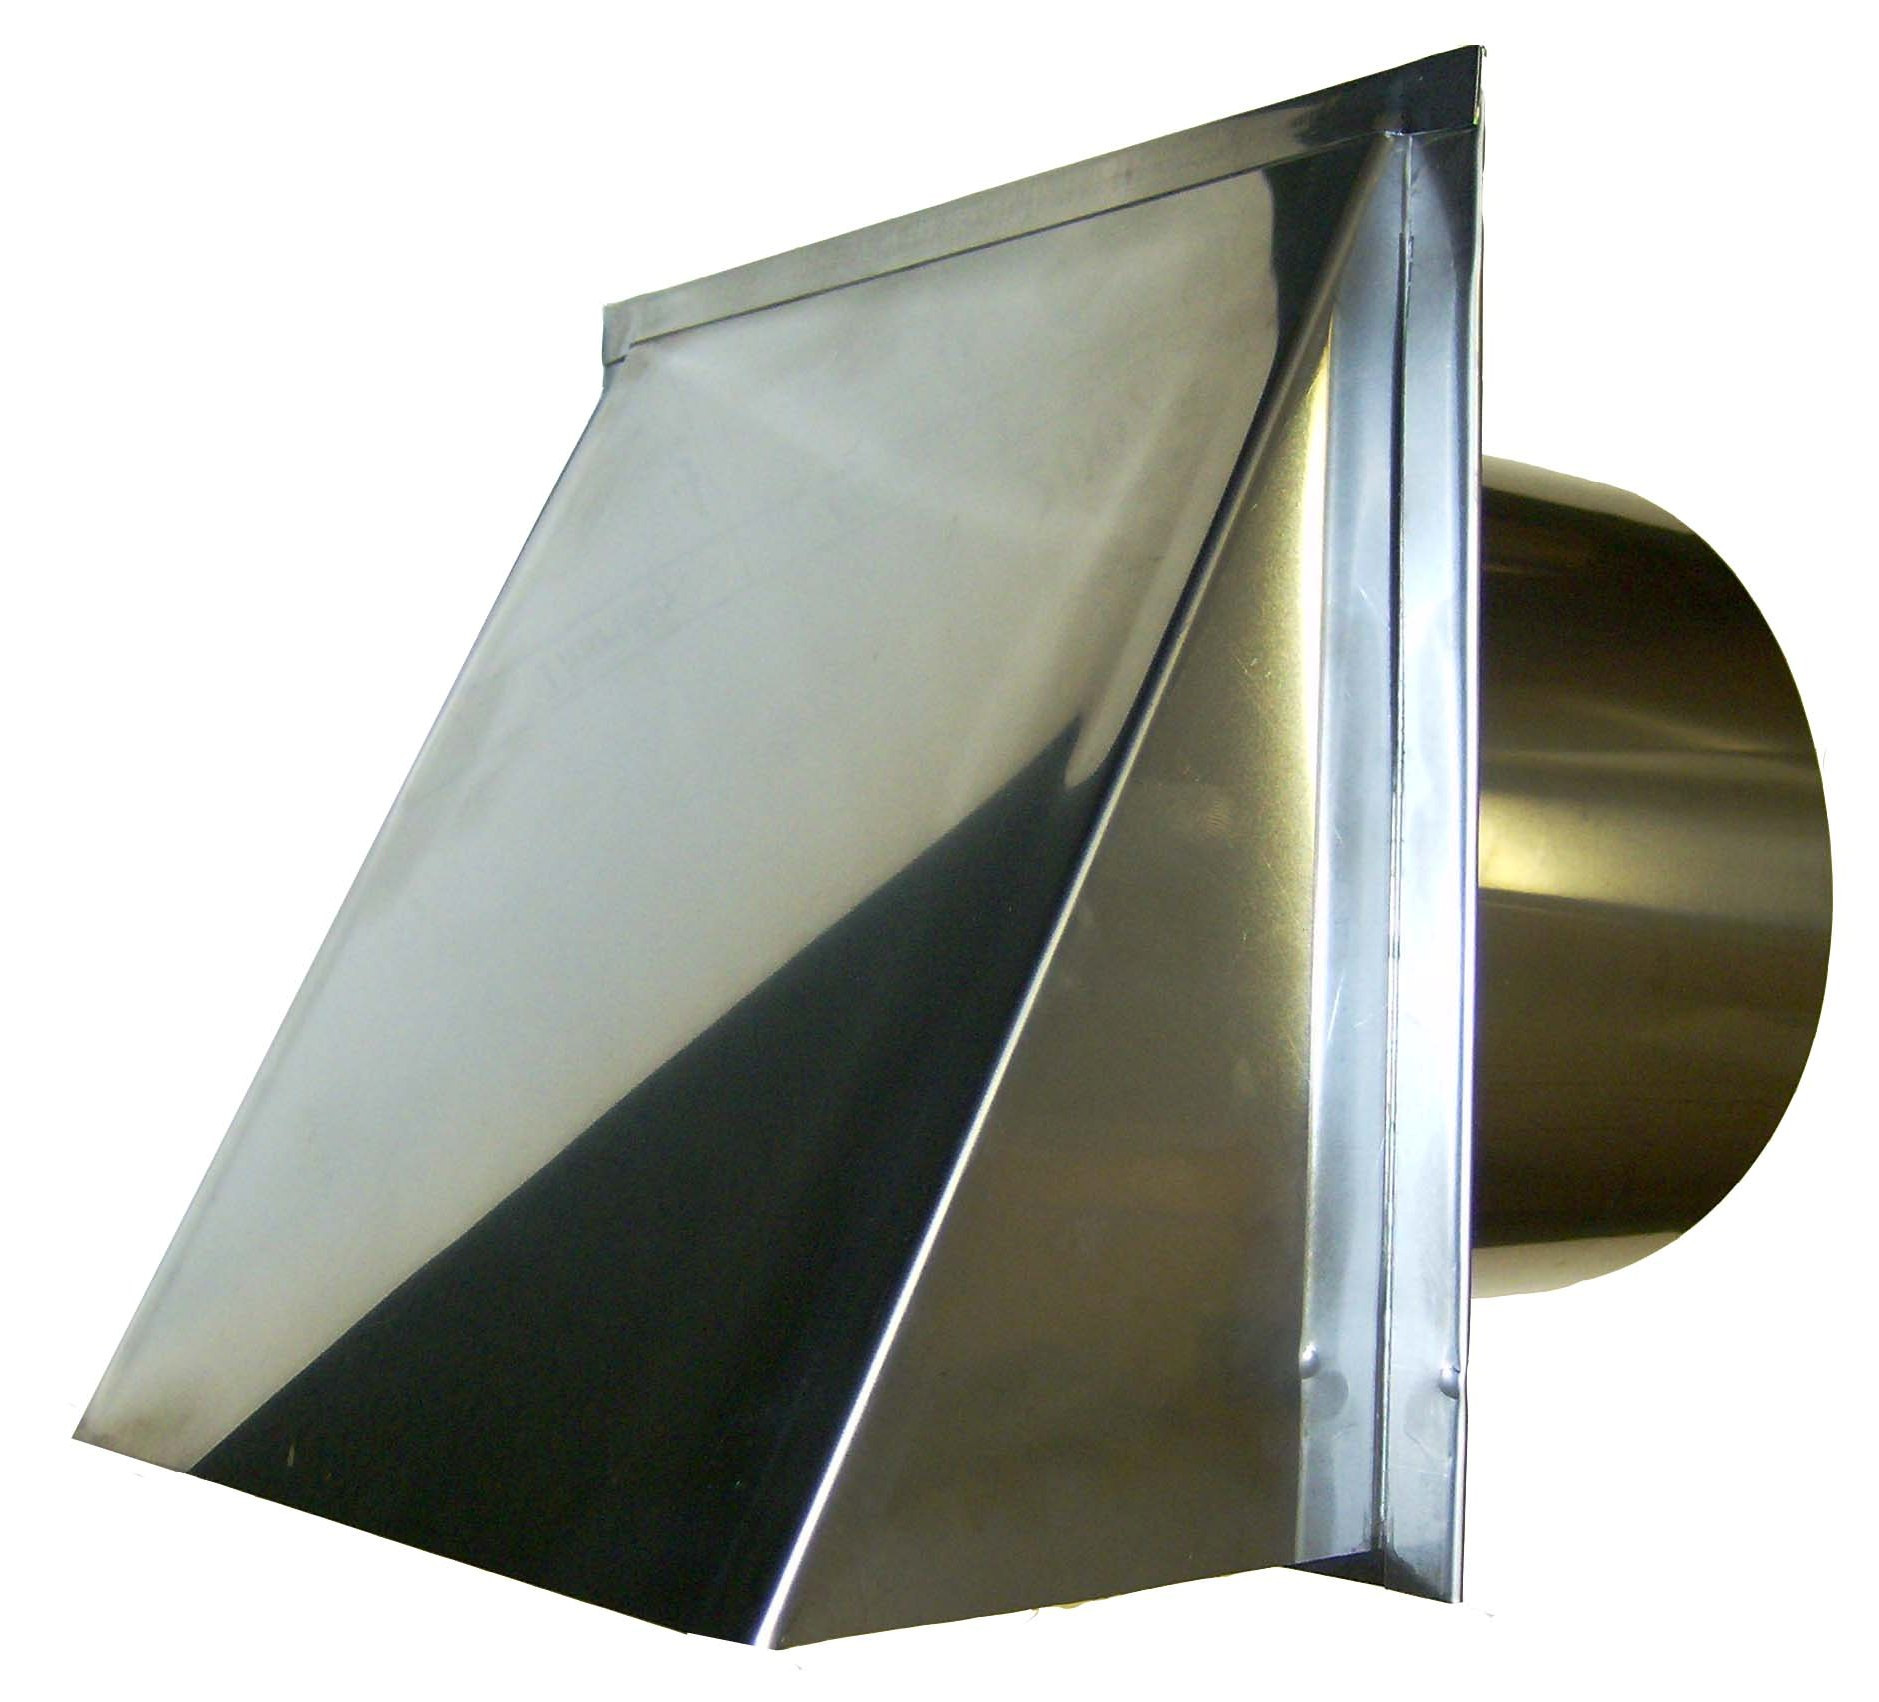 Kitchen Exhaust Vent Wall Cap
 Ducting Wall Caps Intake and Exhaust w Screen or Dampers